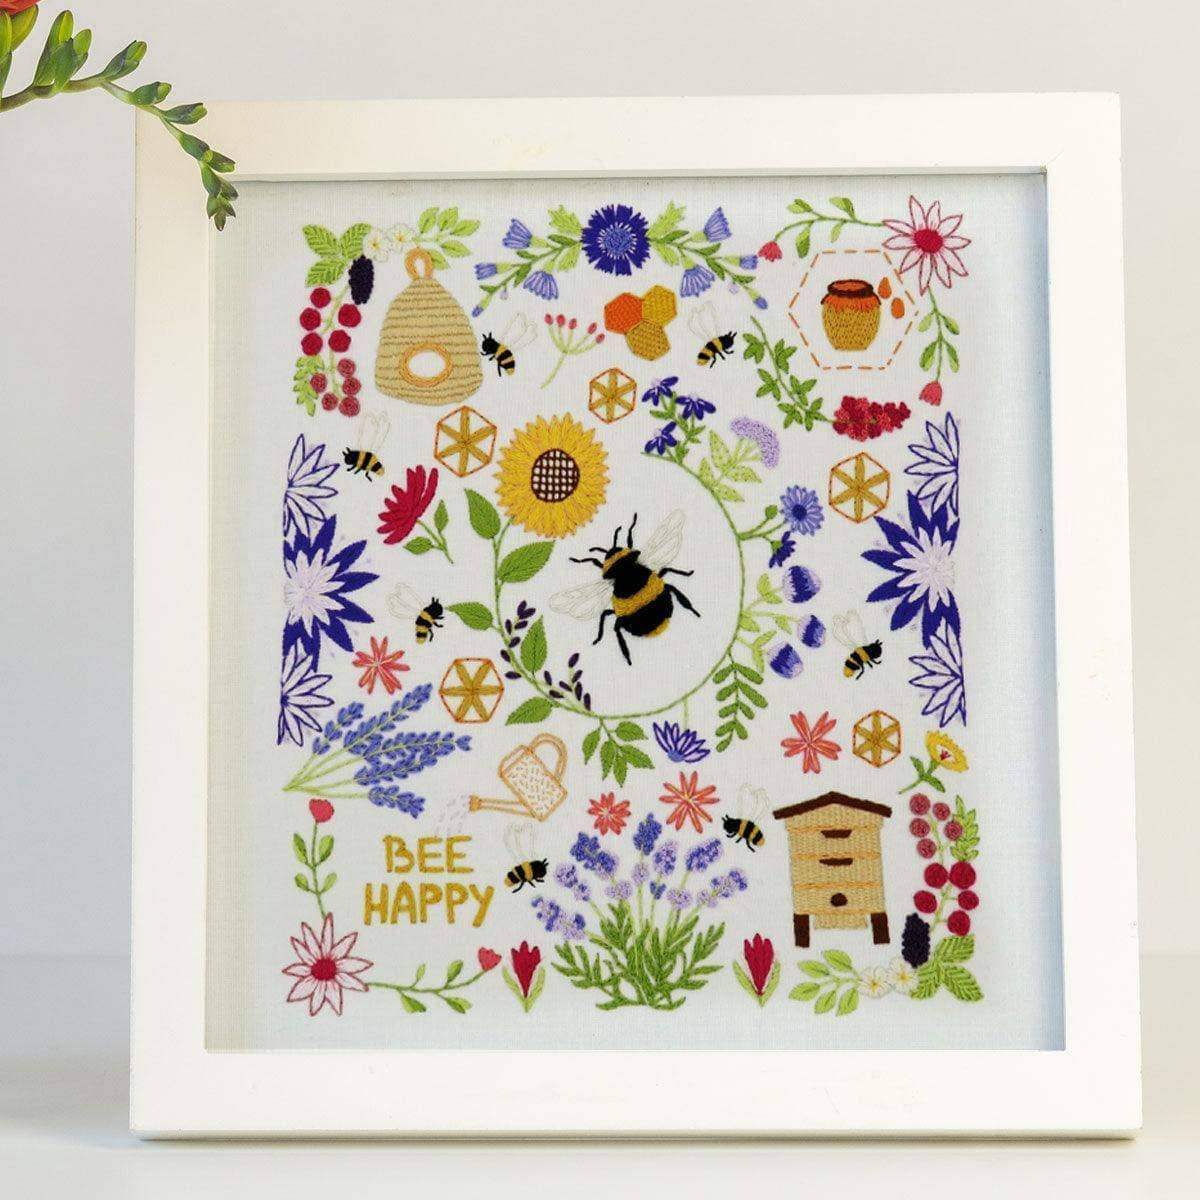 Bees and Blossoms Hand Embroidery Pattern , PDF Download , StitchDoodles , bird embroidery, Embroidery, embroidery hoop, embroidery hoop kit, Embroidery Kit, embroidery kit for adults, embroidery kit fro beginners, embroidery pattern, hand embroidery, hand embroidery fabric, hand embroidery kit, hand embroidery seat frame, modern embroidery kits, nurge embroidery hoop, PDF pattern, Printed Pattern, wildlife embroidery , StitchDoodles , shop.stitchdoodles.com